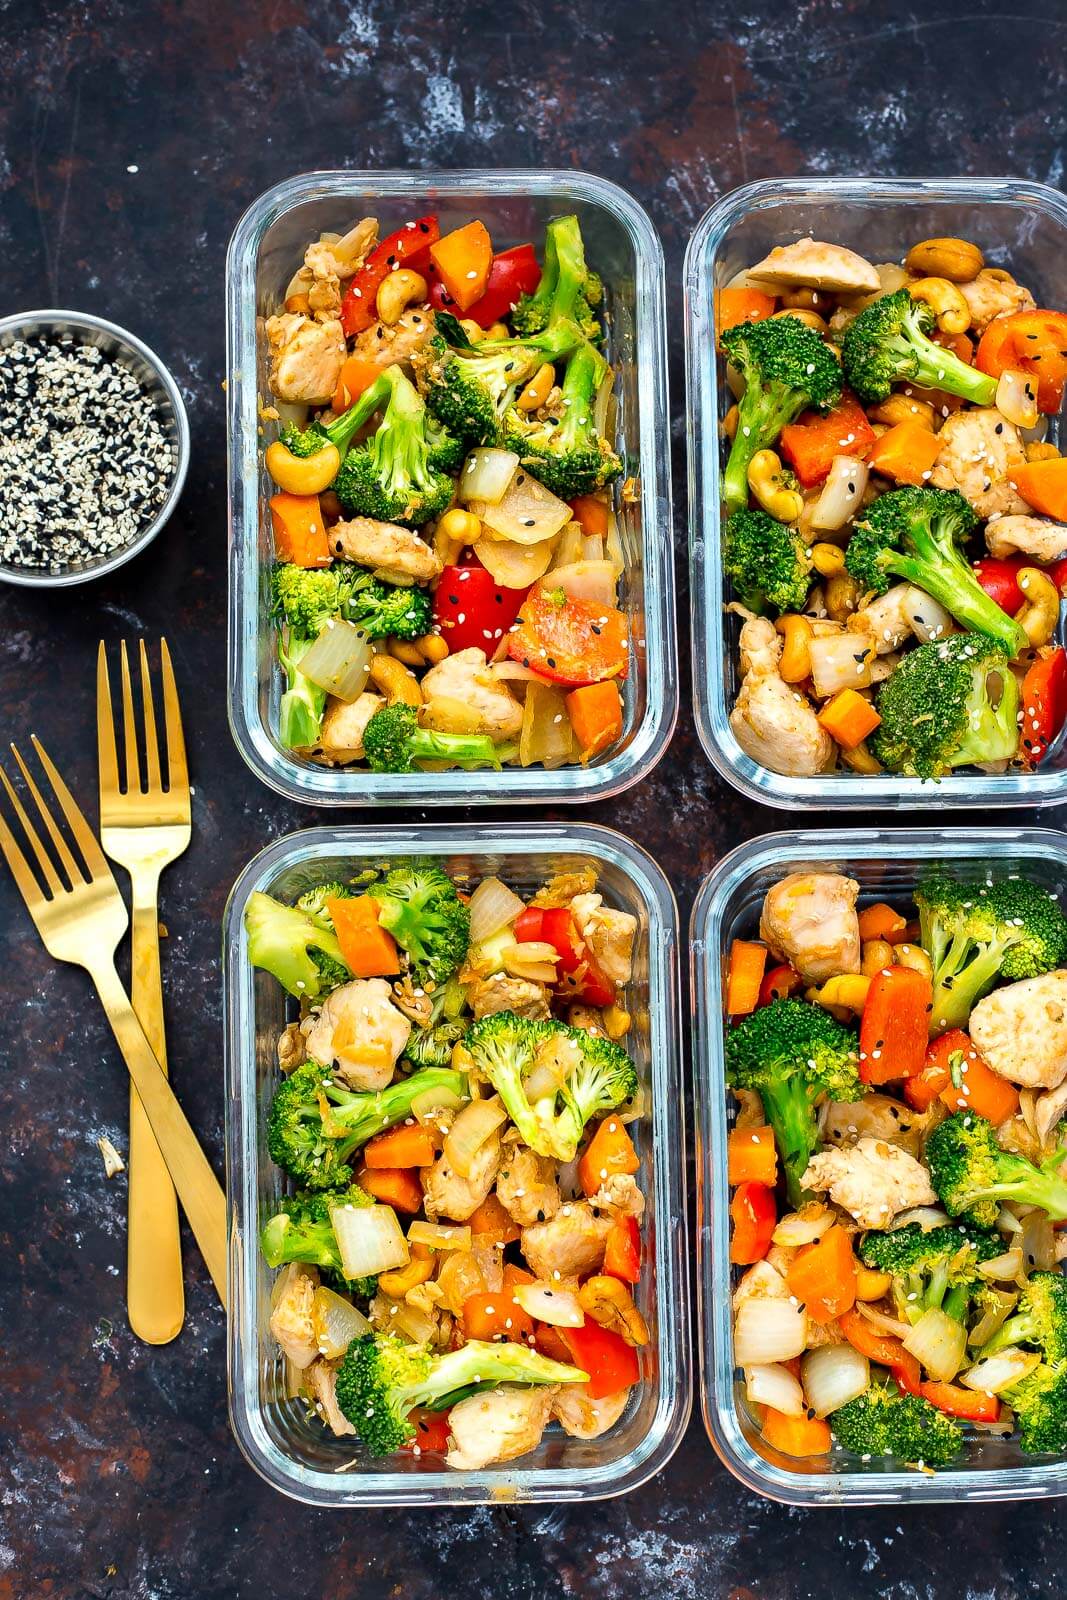 31 Meal Prep Recipes Perfect For Quick Easy Meals To Lose Fat Fast! TrimmedandToned